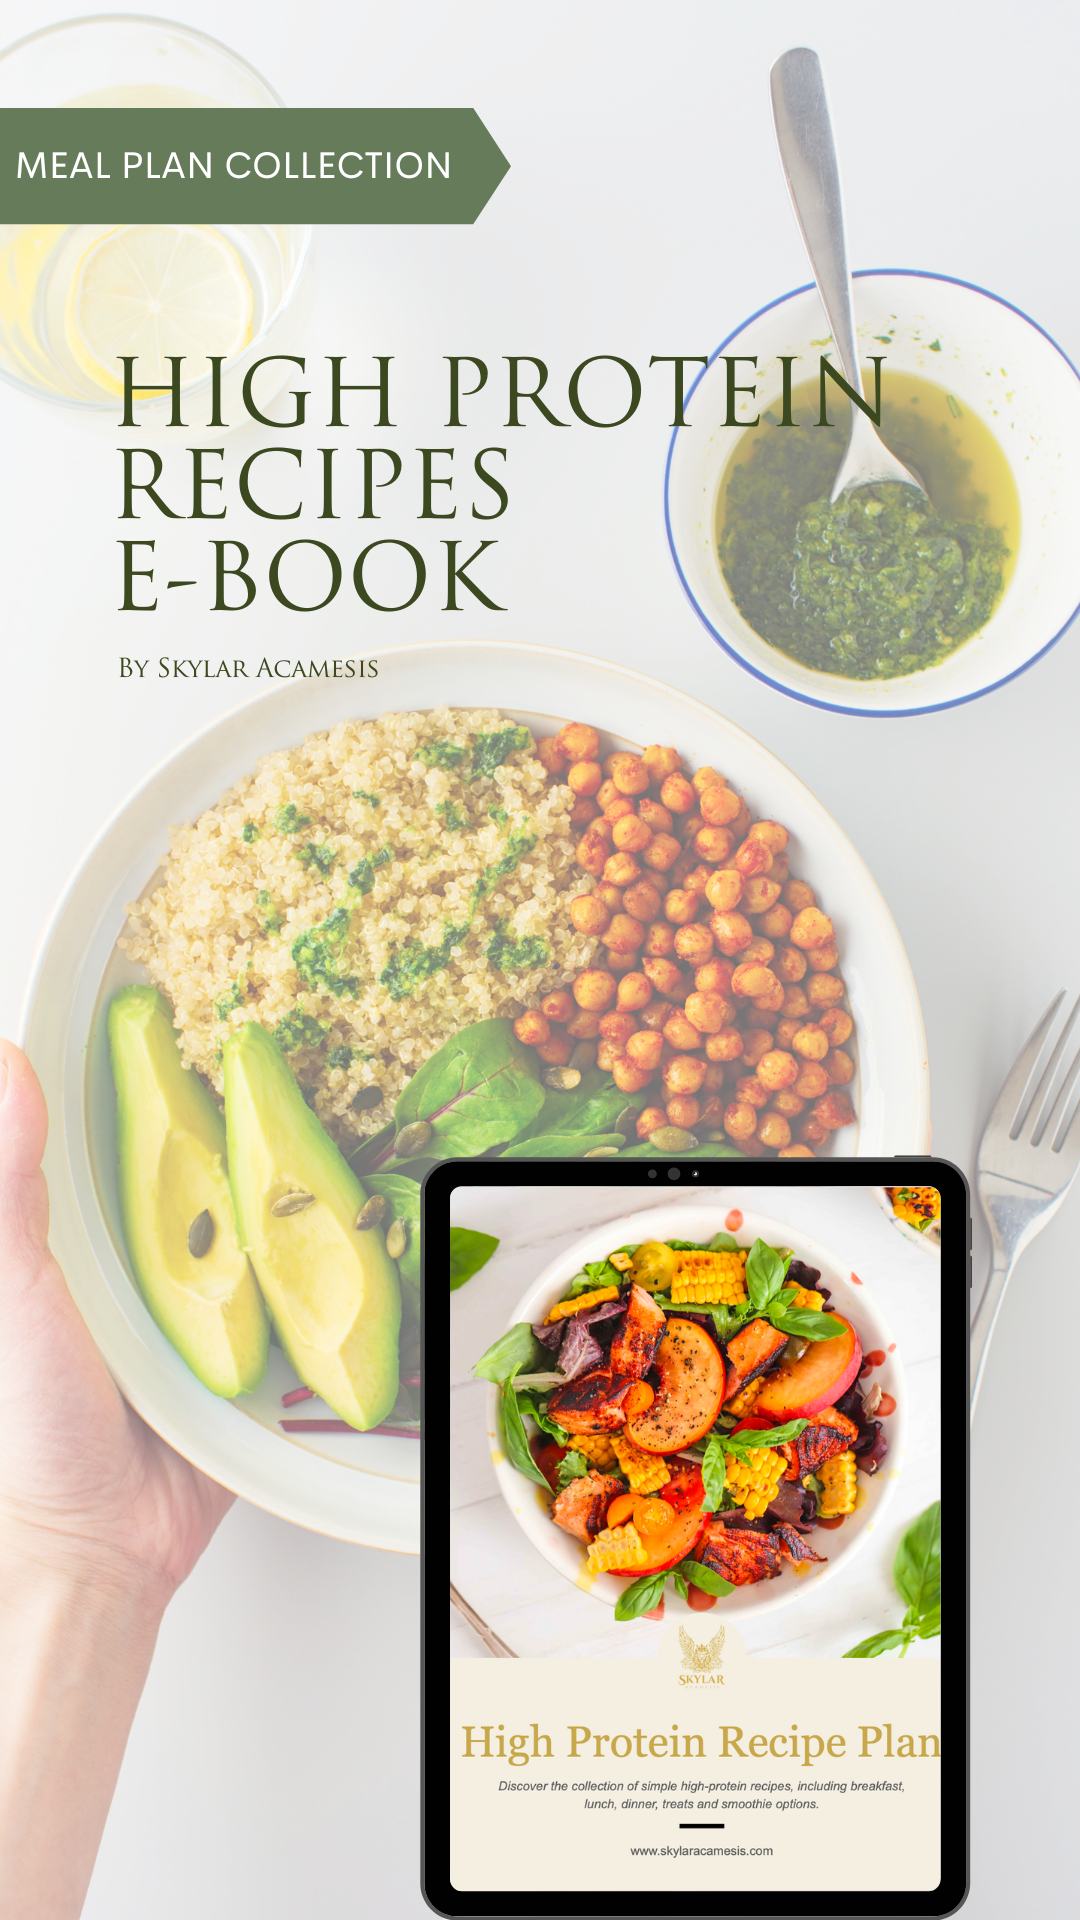 High Protein Recipe Book - Sky's Meal Plans Collection